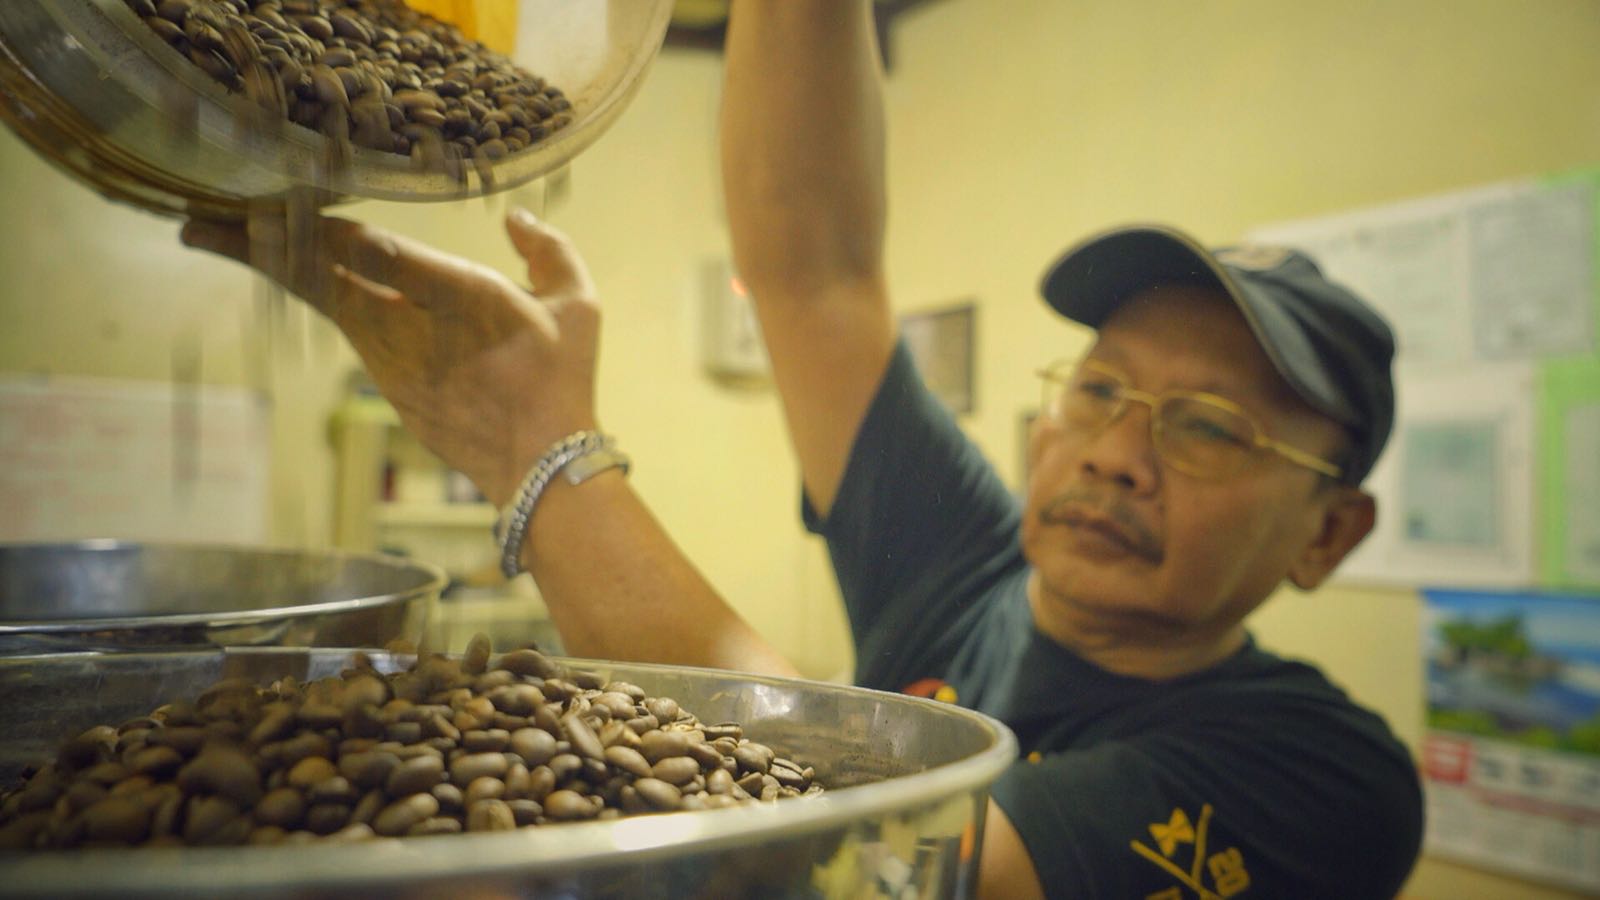 asep pouring beans into roaster.jpeg